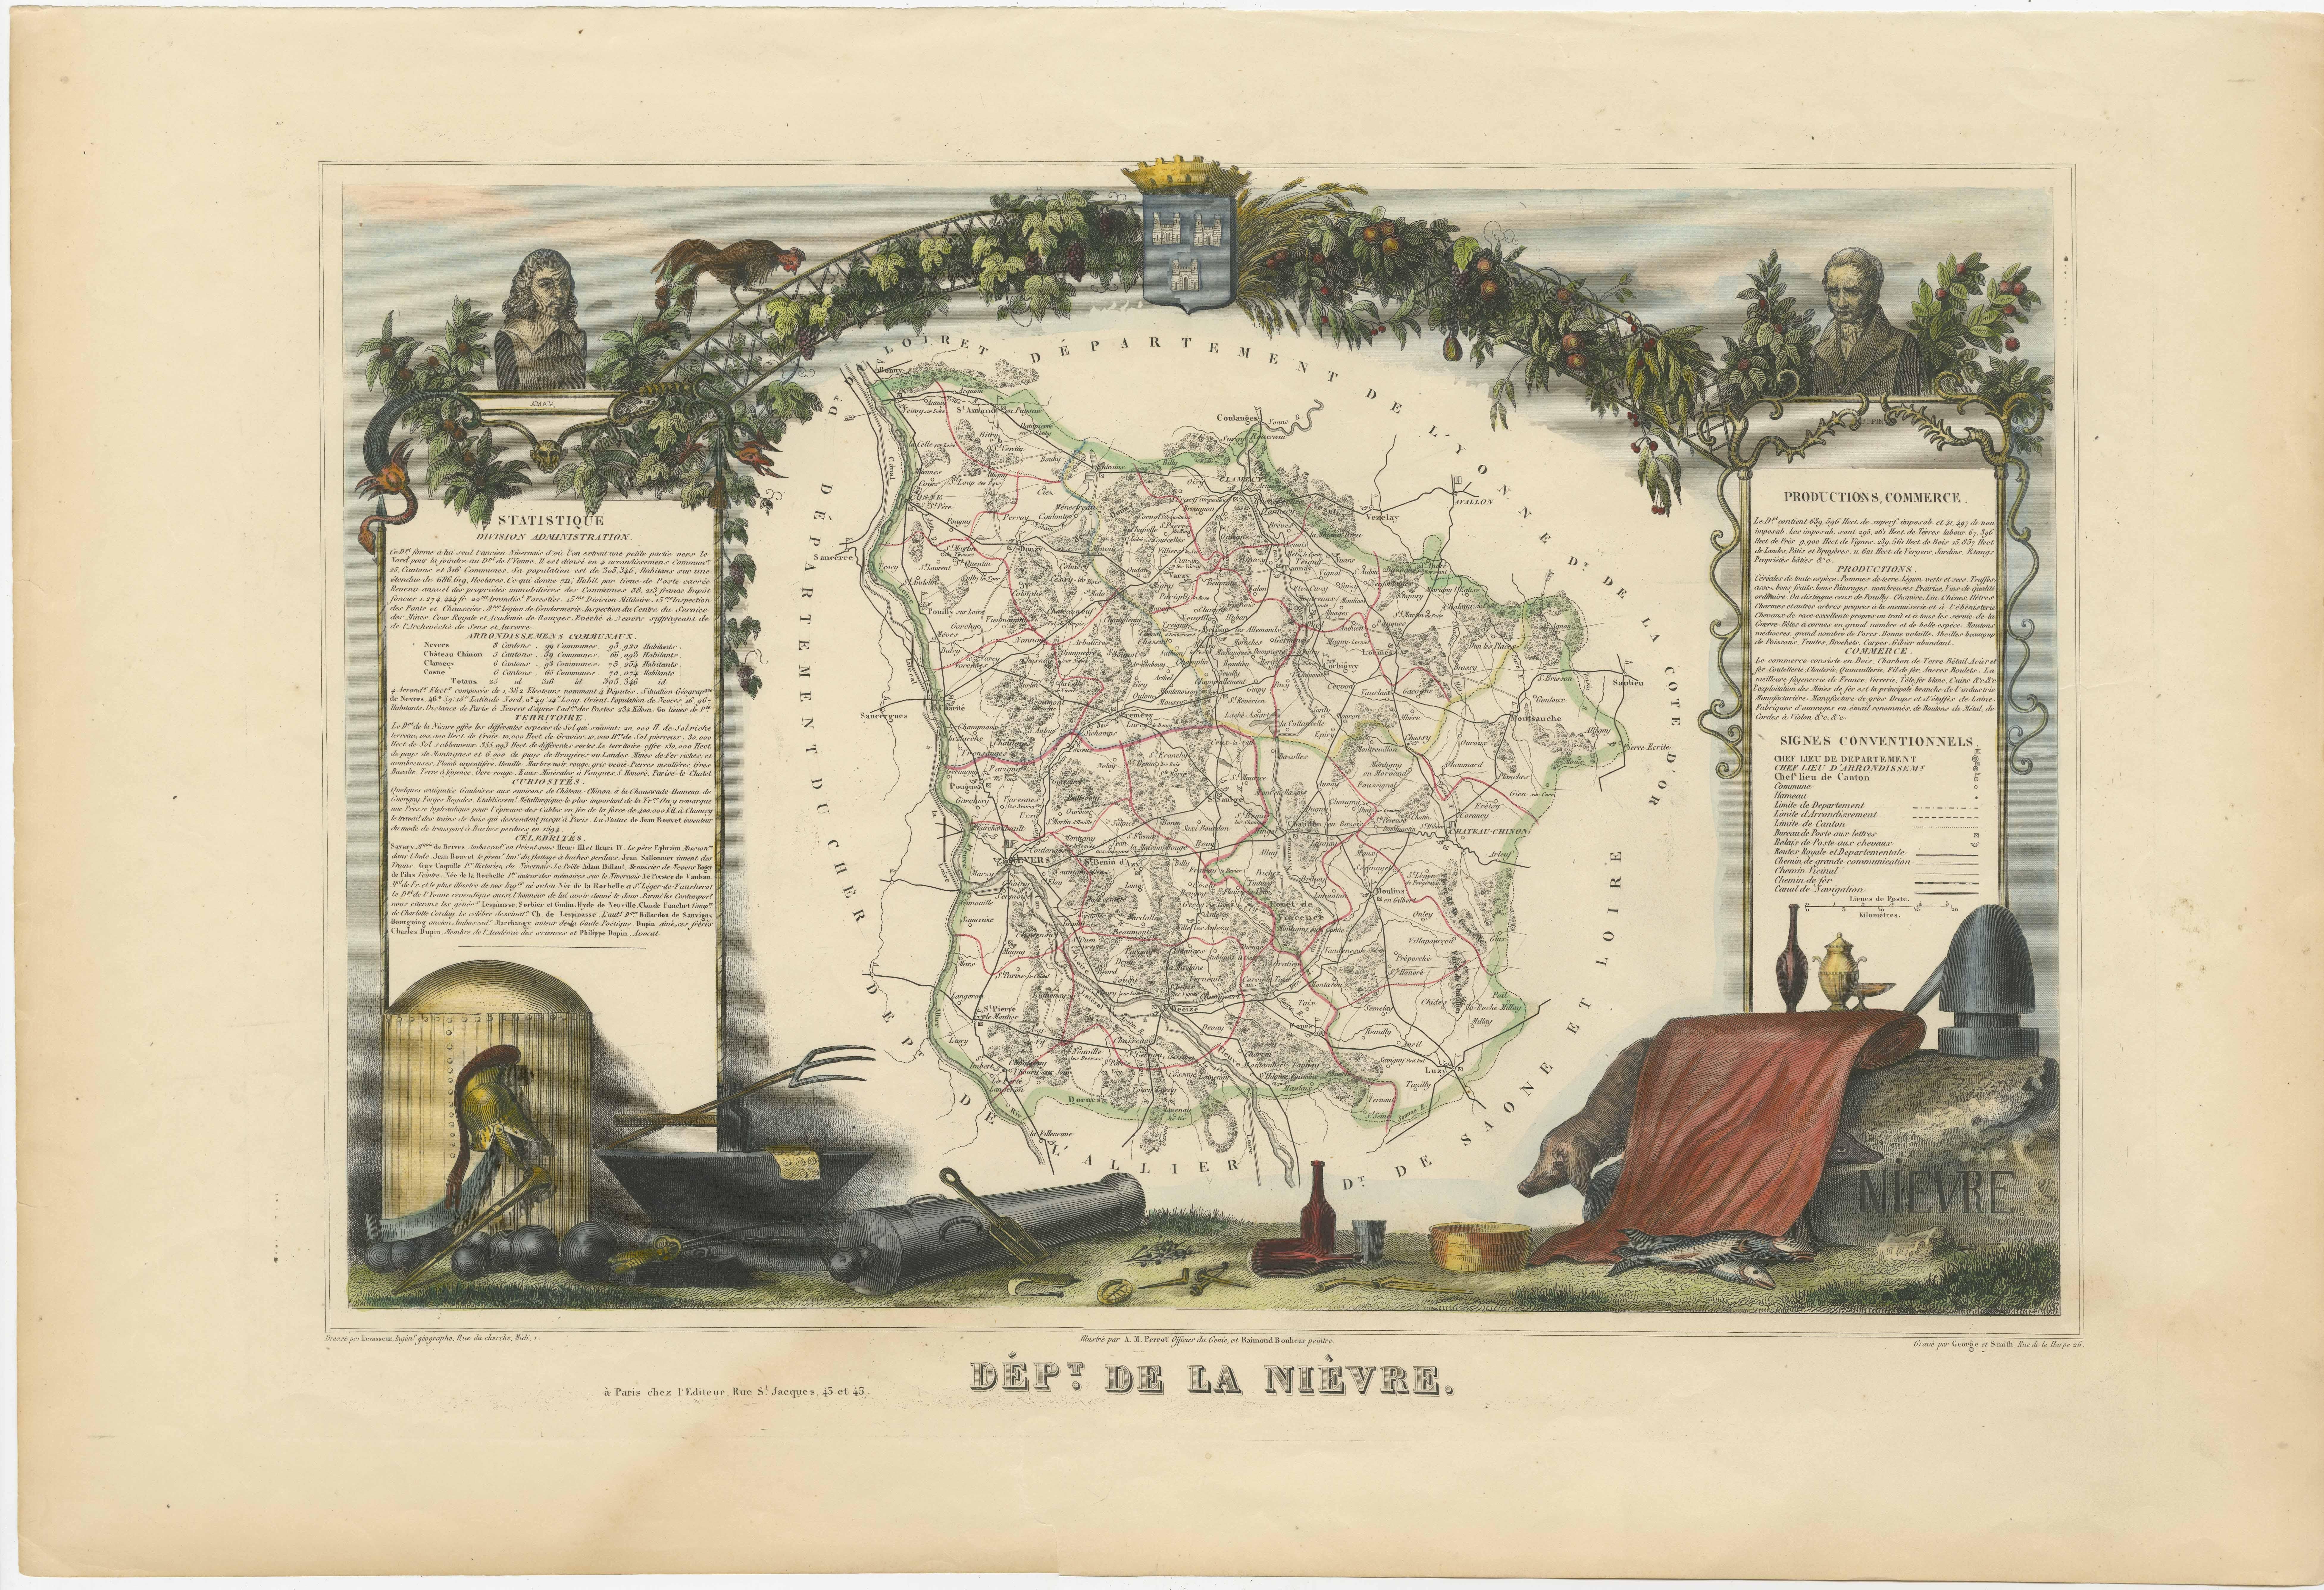 Antique map titled 'Dept. de la Nièvre'. Map of the French department of Nievre, France. Part of the prestiegous Burgundy or Bourgogne wine region this area is known for its production of Pouilly Fumé, a white wine. The word “fumé” is French for